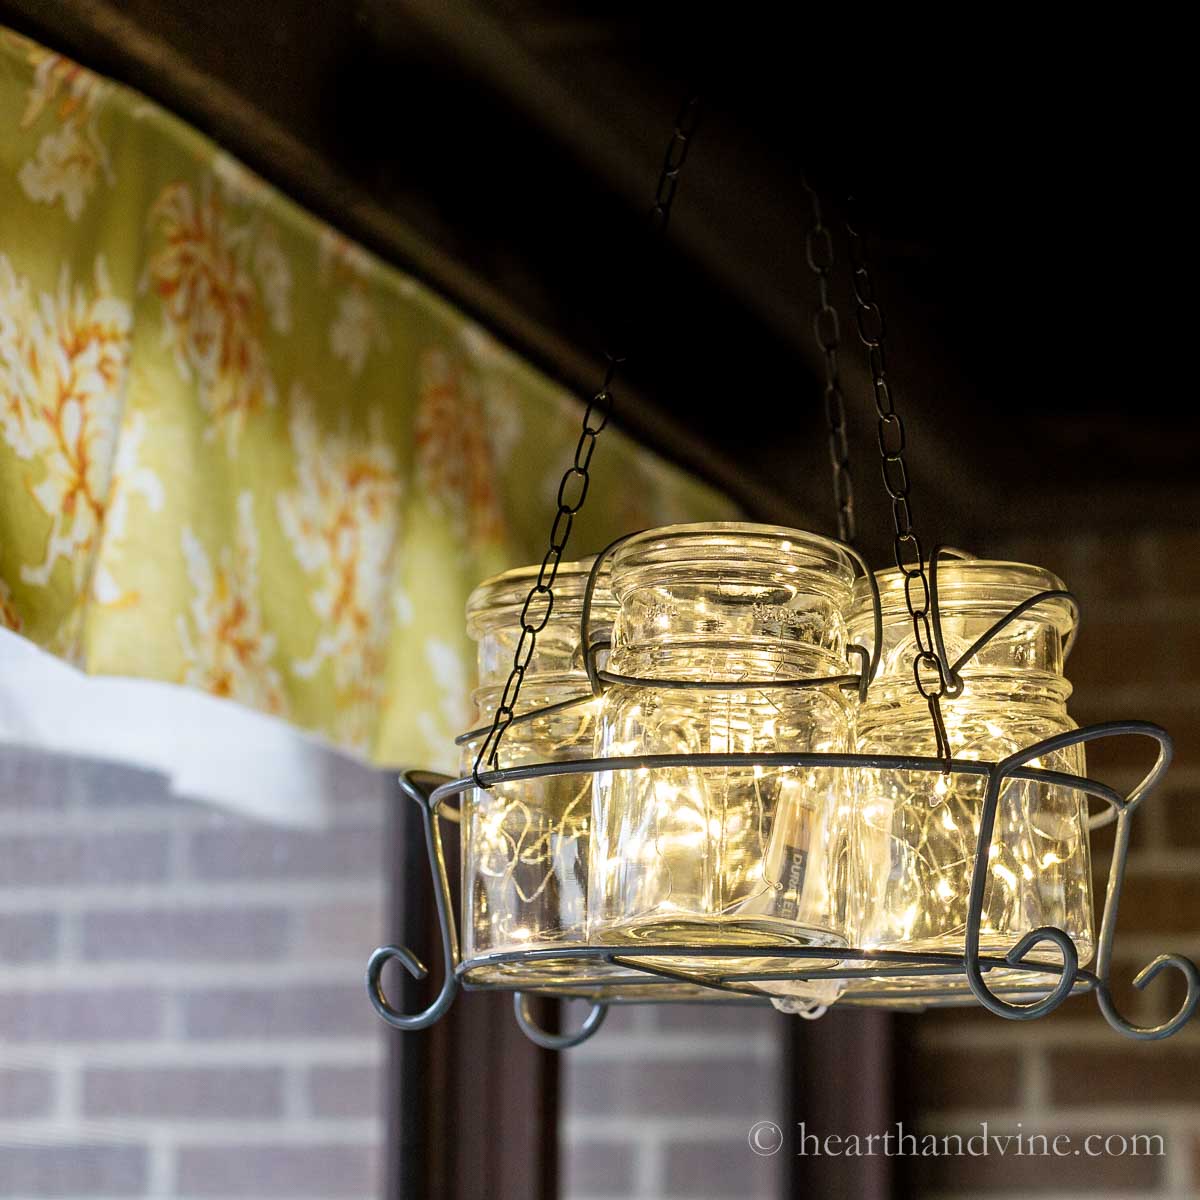 Vintage mason jars (5) in a wire basket with lights hanging like a chandelier.